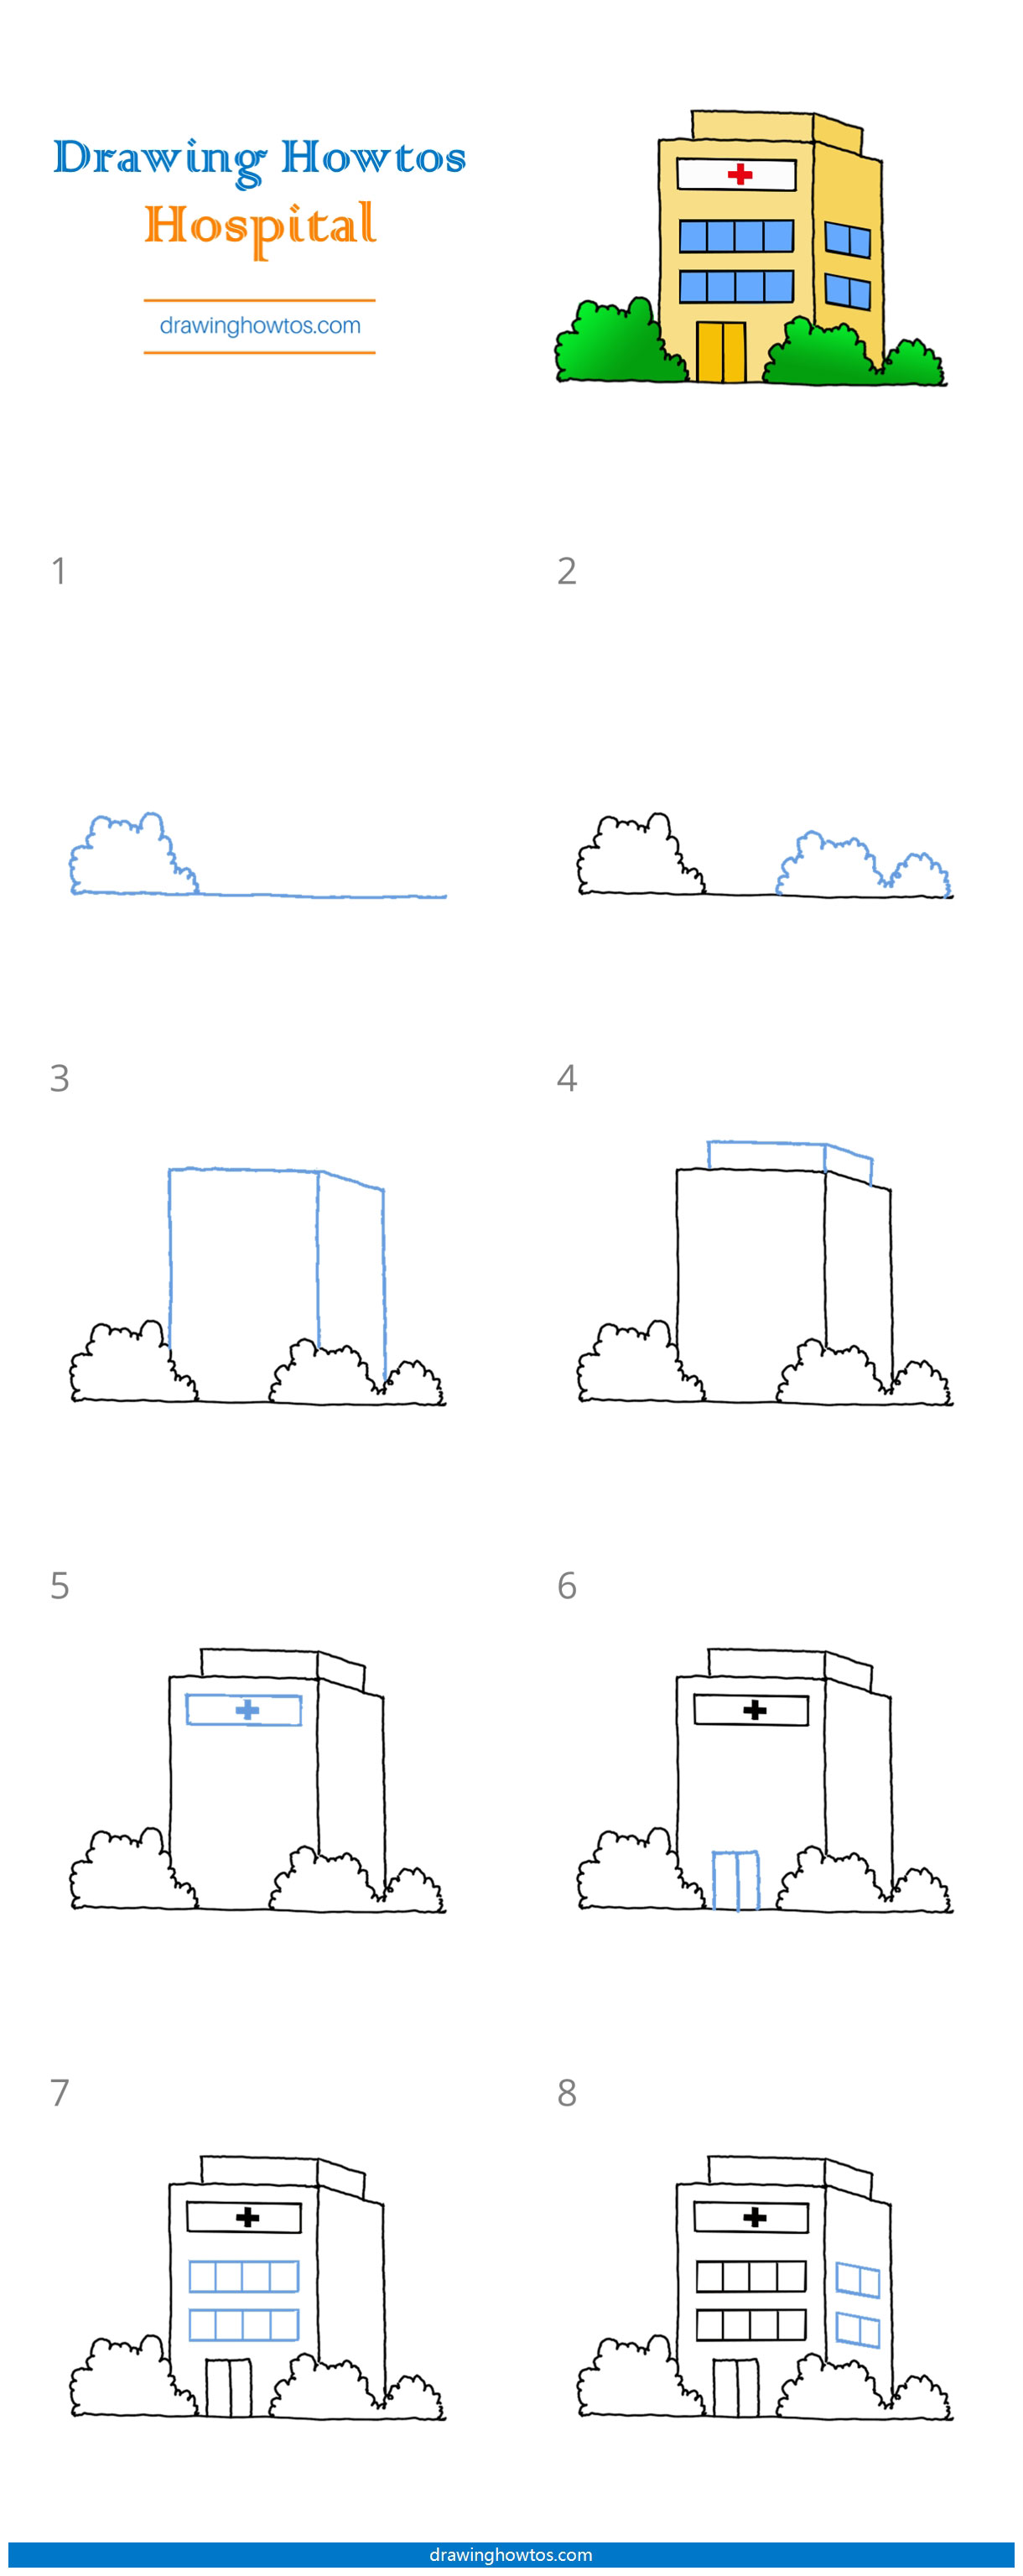 How to Draw a Hospital Step by Step